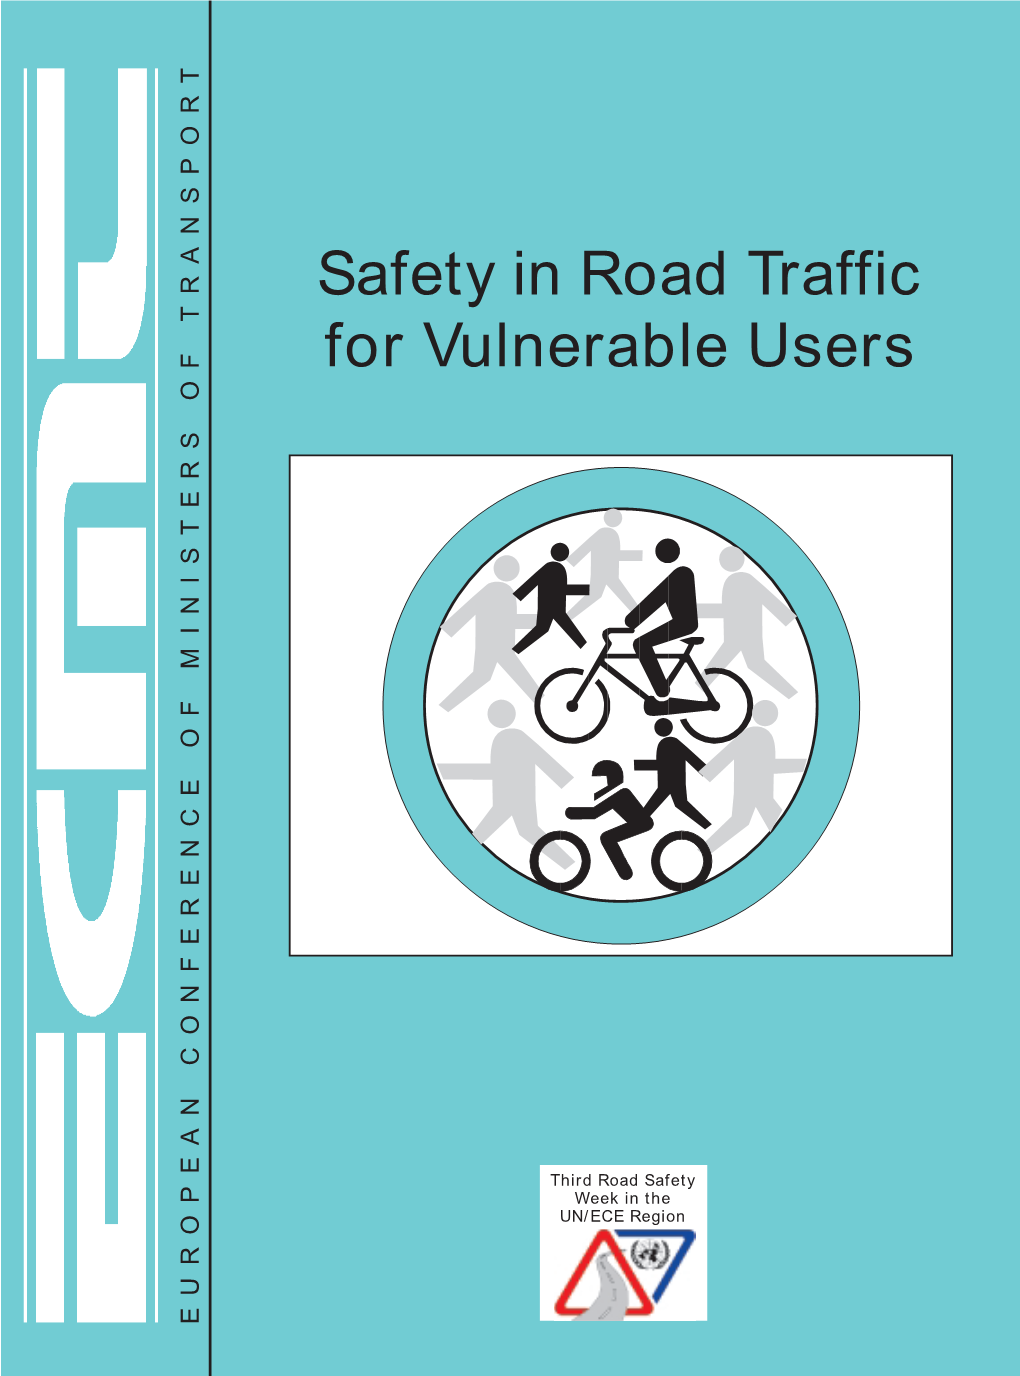 Safety in Road Traffic for Vulnerable Users